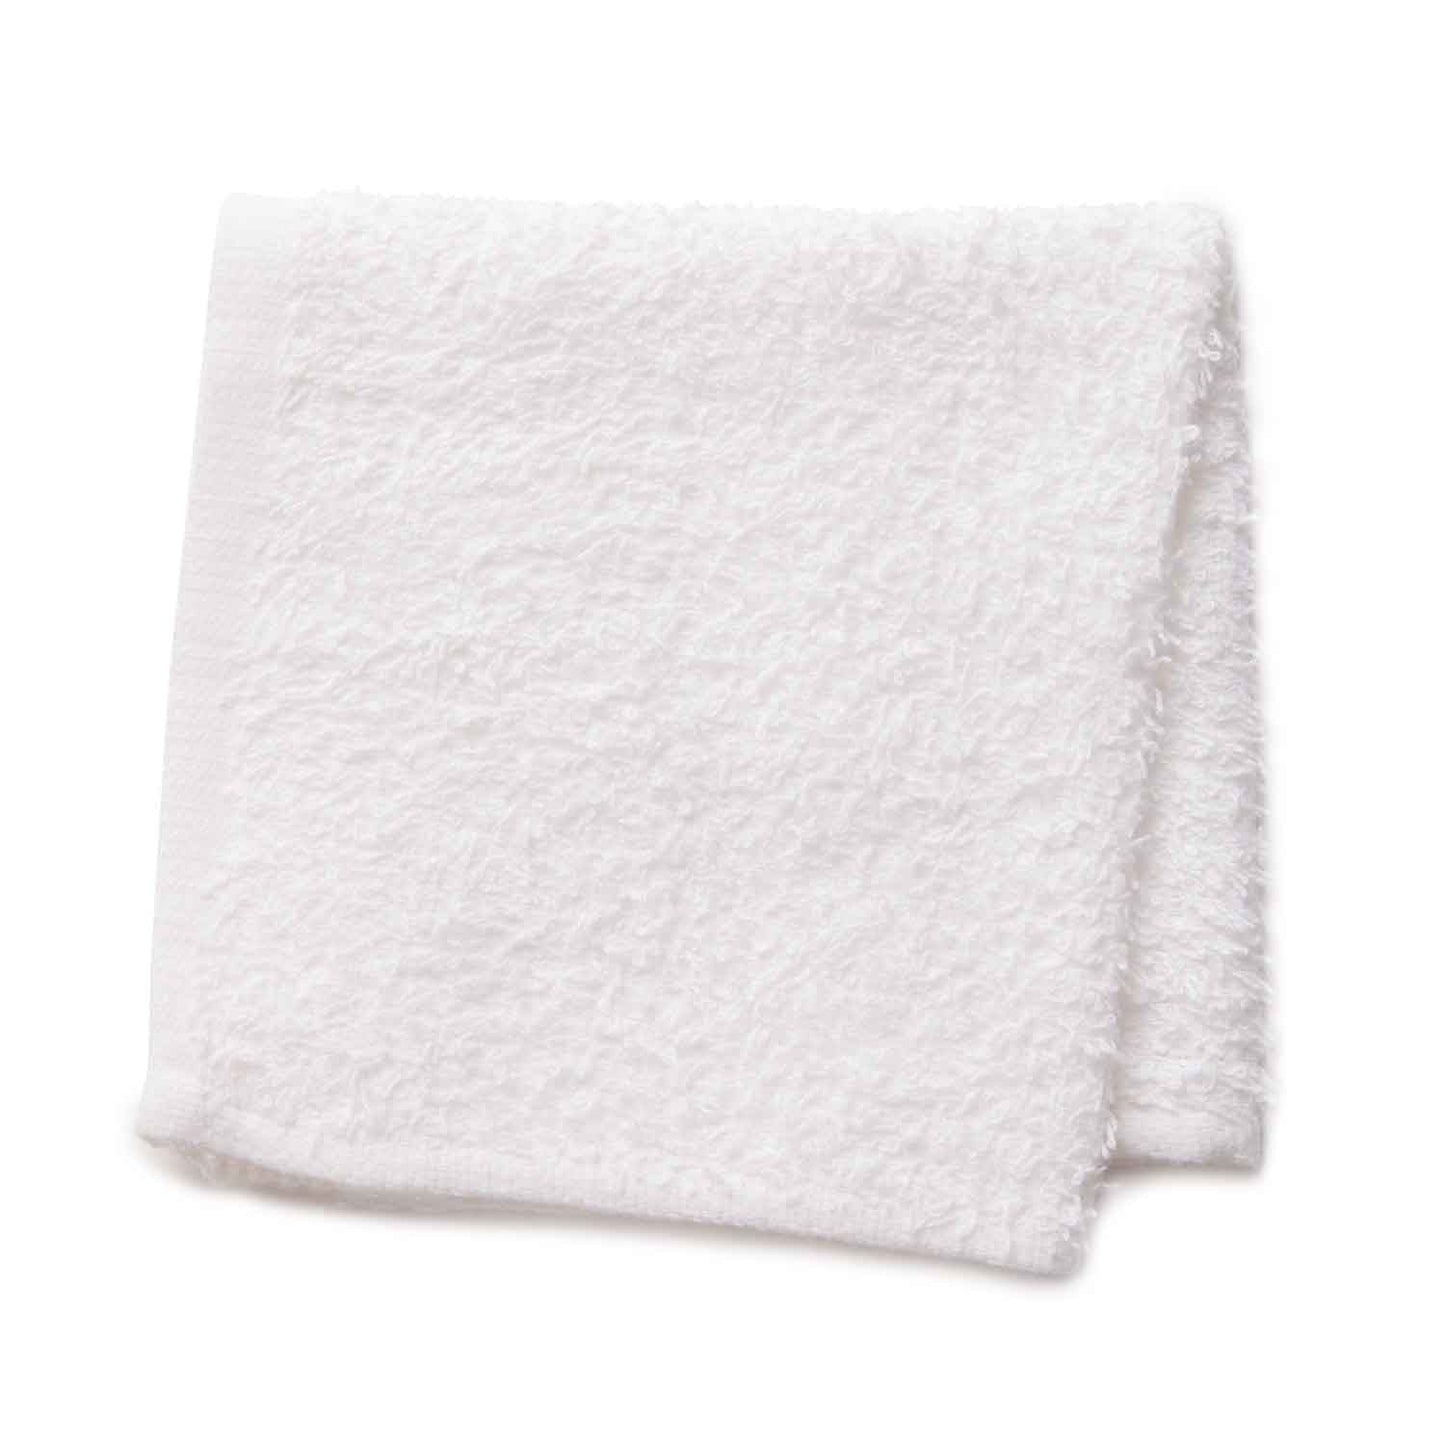 American Dawn | 12X12 Inch White With No Cam Healthcare Towel | Wash Cloth